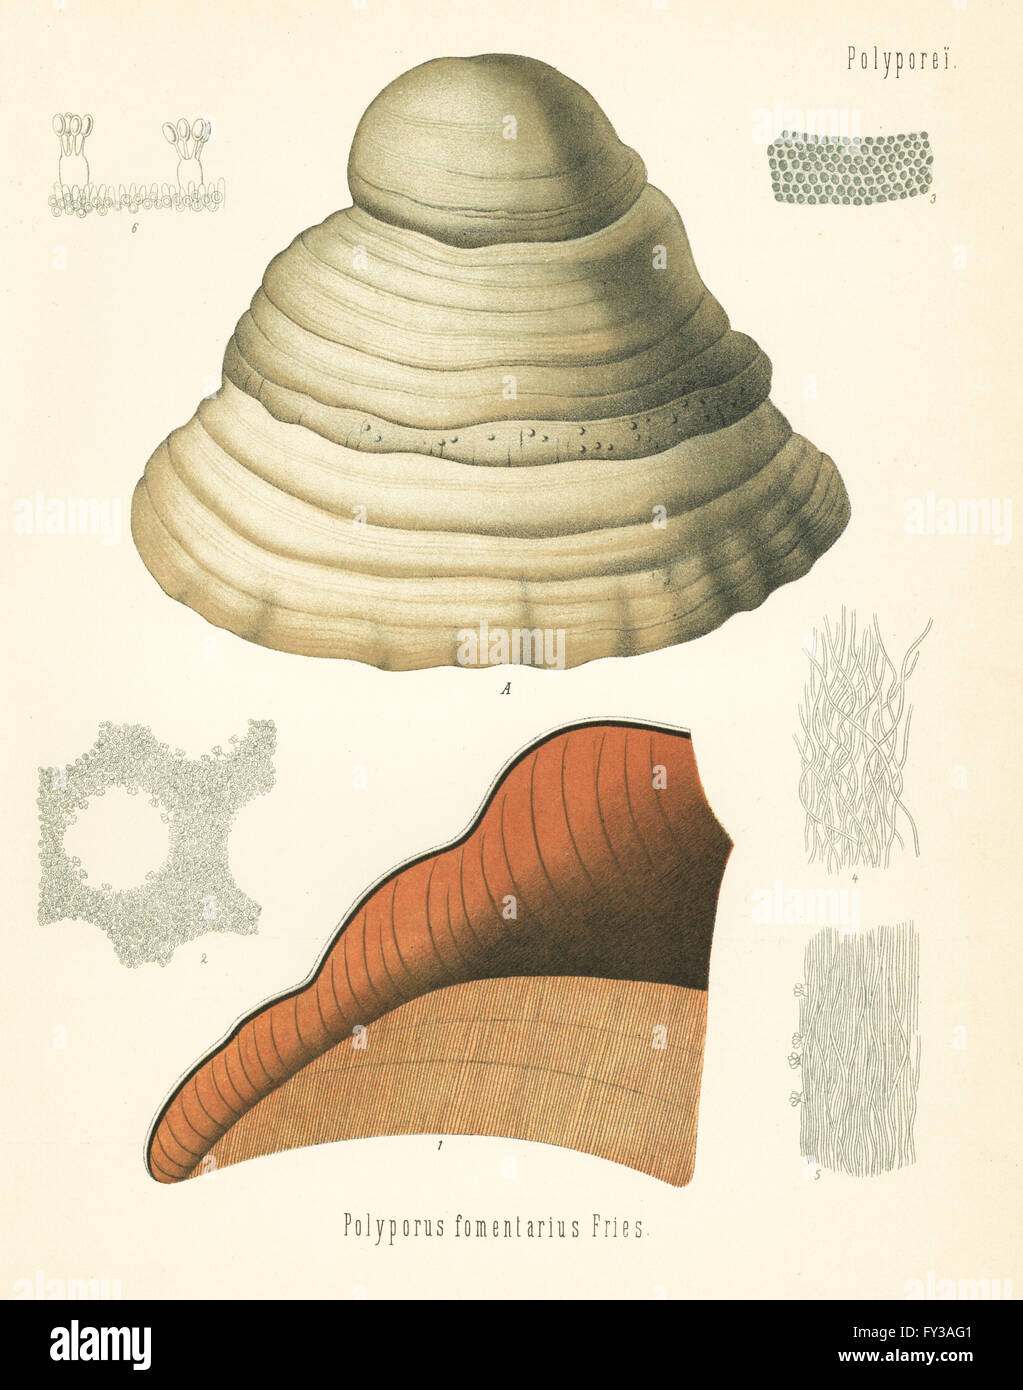 Tinder fungus or hoof fungus, Fomes fomentarius (Polyporus fomentarius). Chromolithograph after a botanical illustration from Hermann Adolph Koehler's Medicinal Plants, edited by Gustav Pabst, Koehler, Germany, 1887. Stock Photo